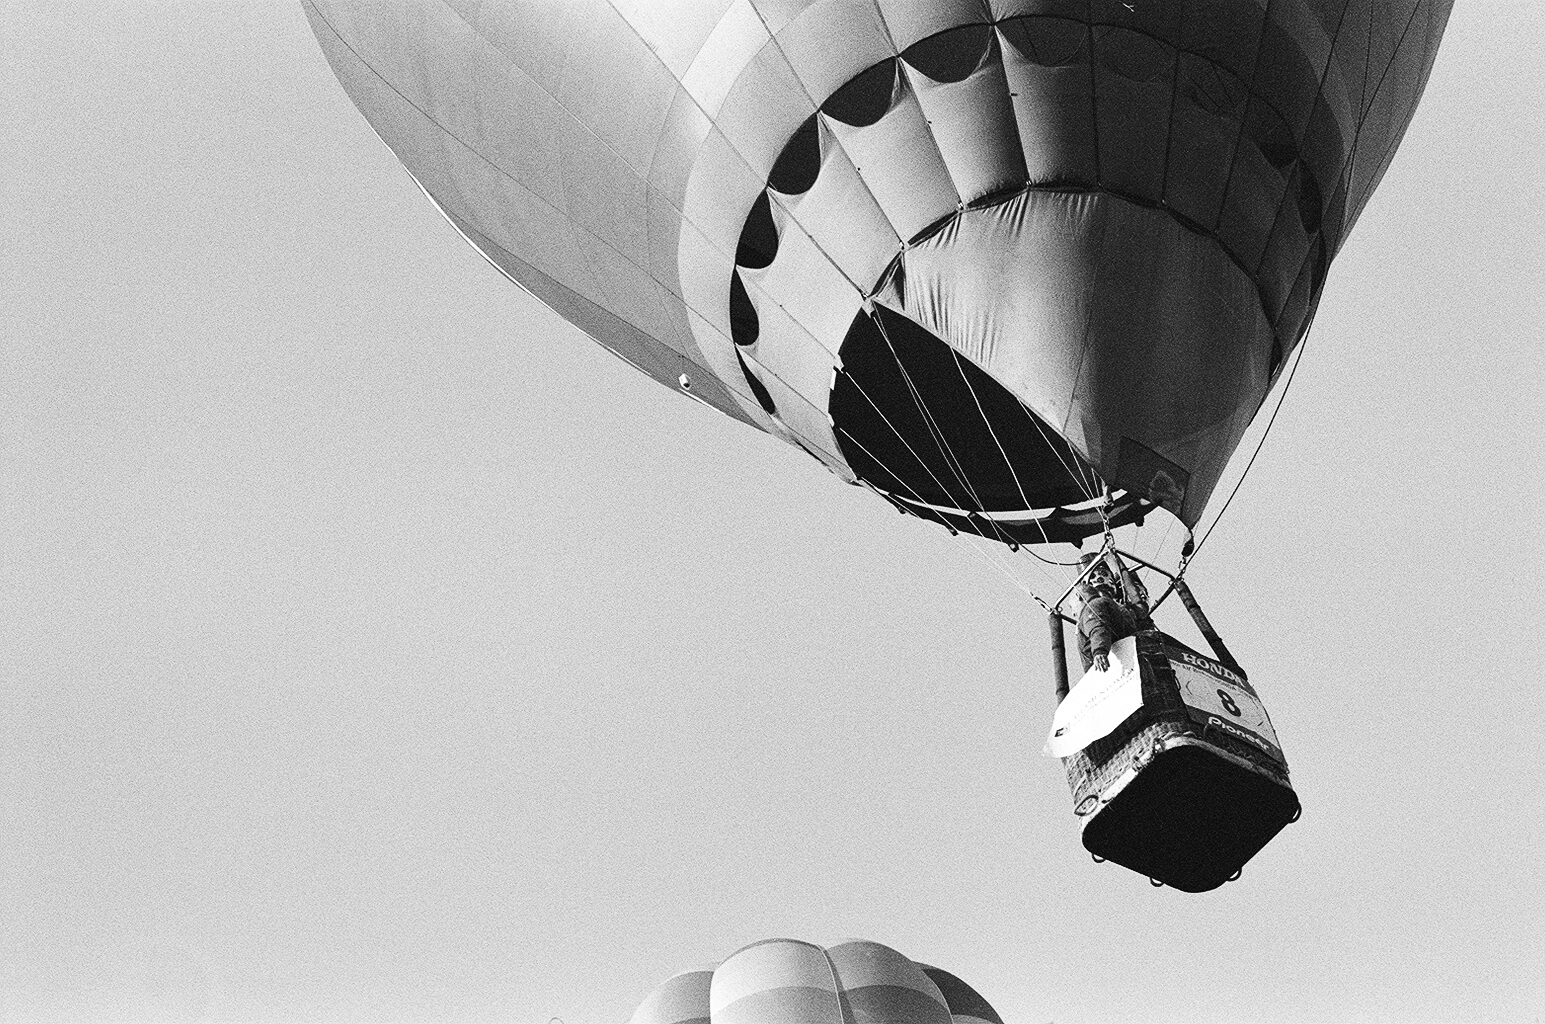 Black and white photograph of hot-air balloon